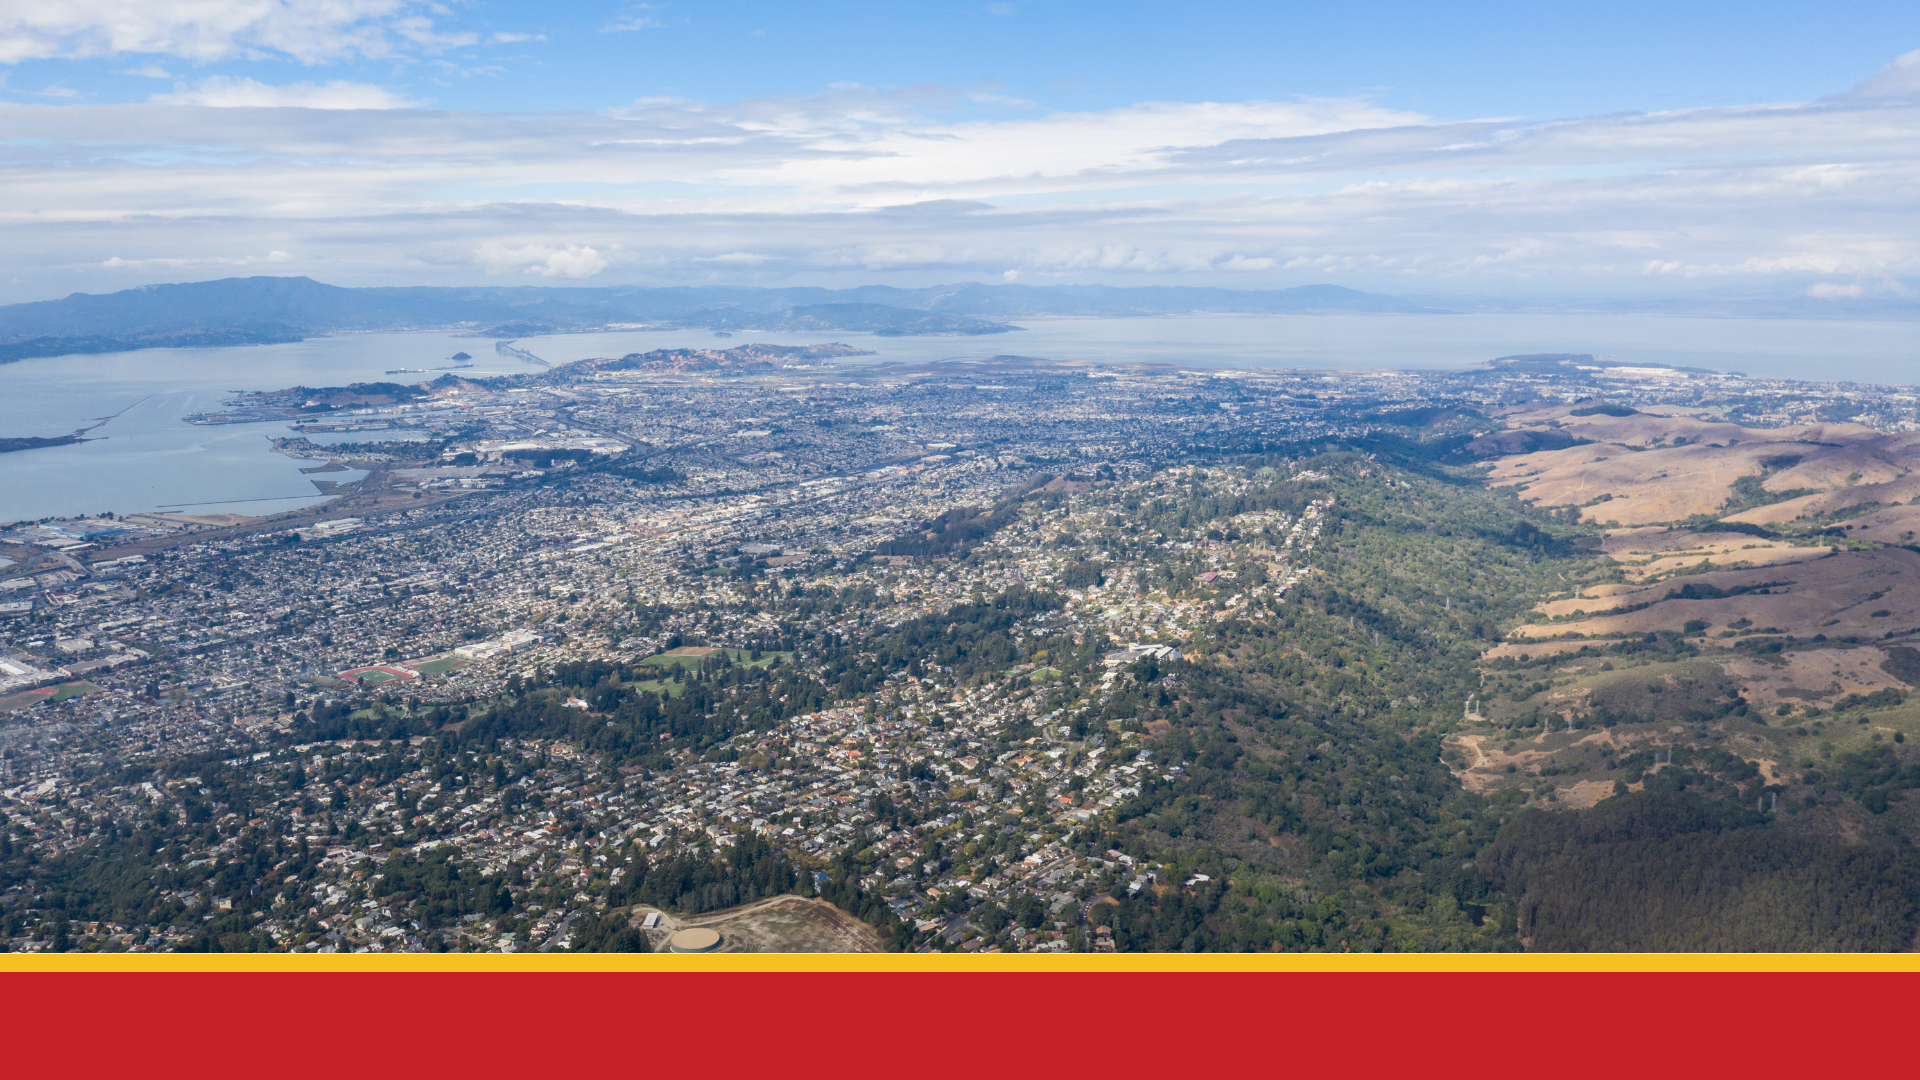 Aerial view of the City of El Cerrito and the City of Richmond